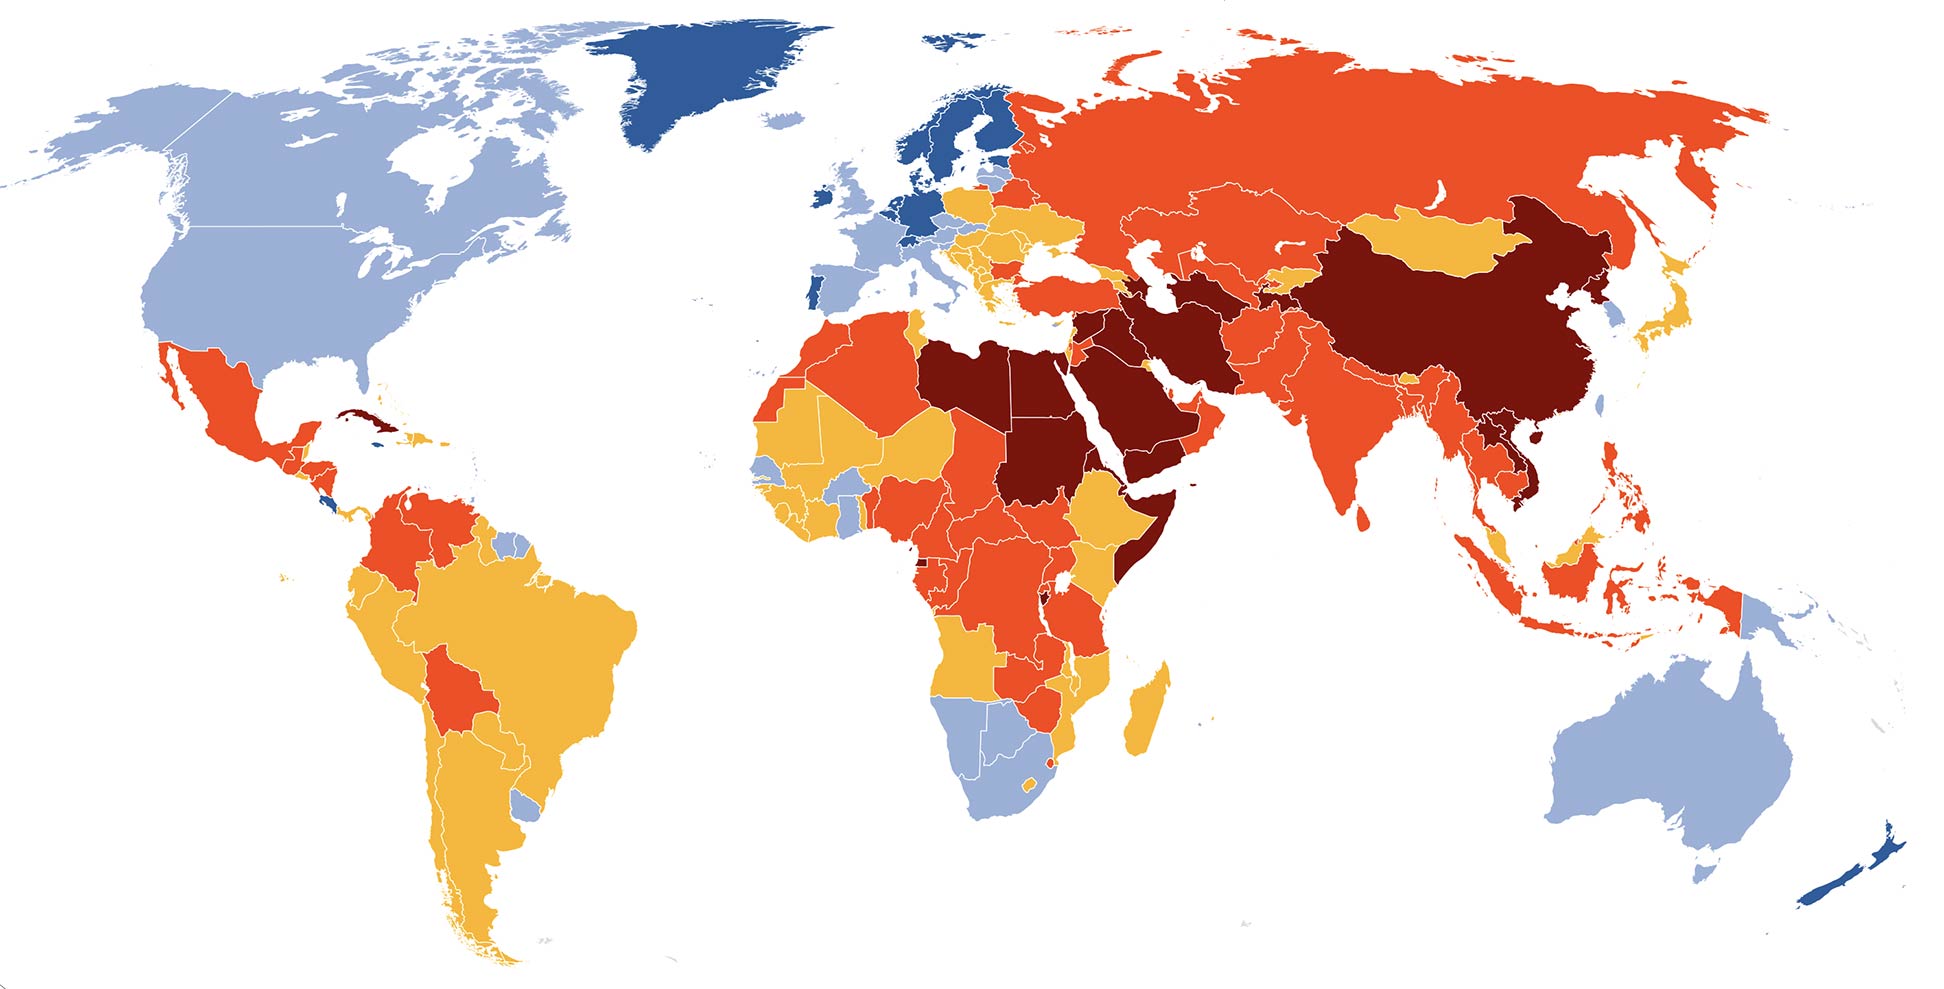 Map of the World with color coded countries: press freedom 2020